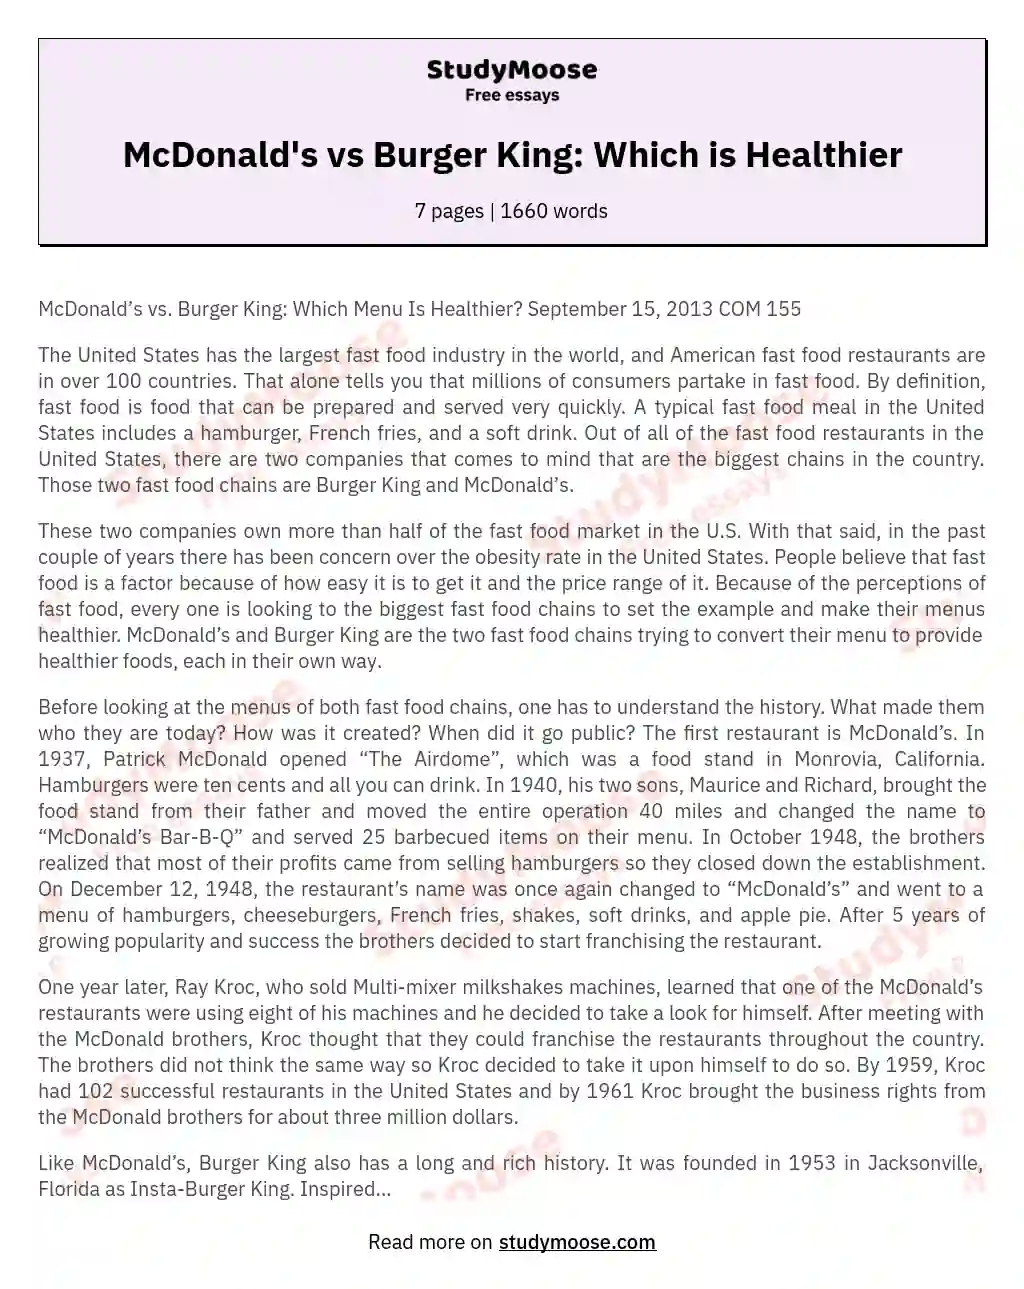 McDonald's vs Burger King: Which is Healthier essay